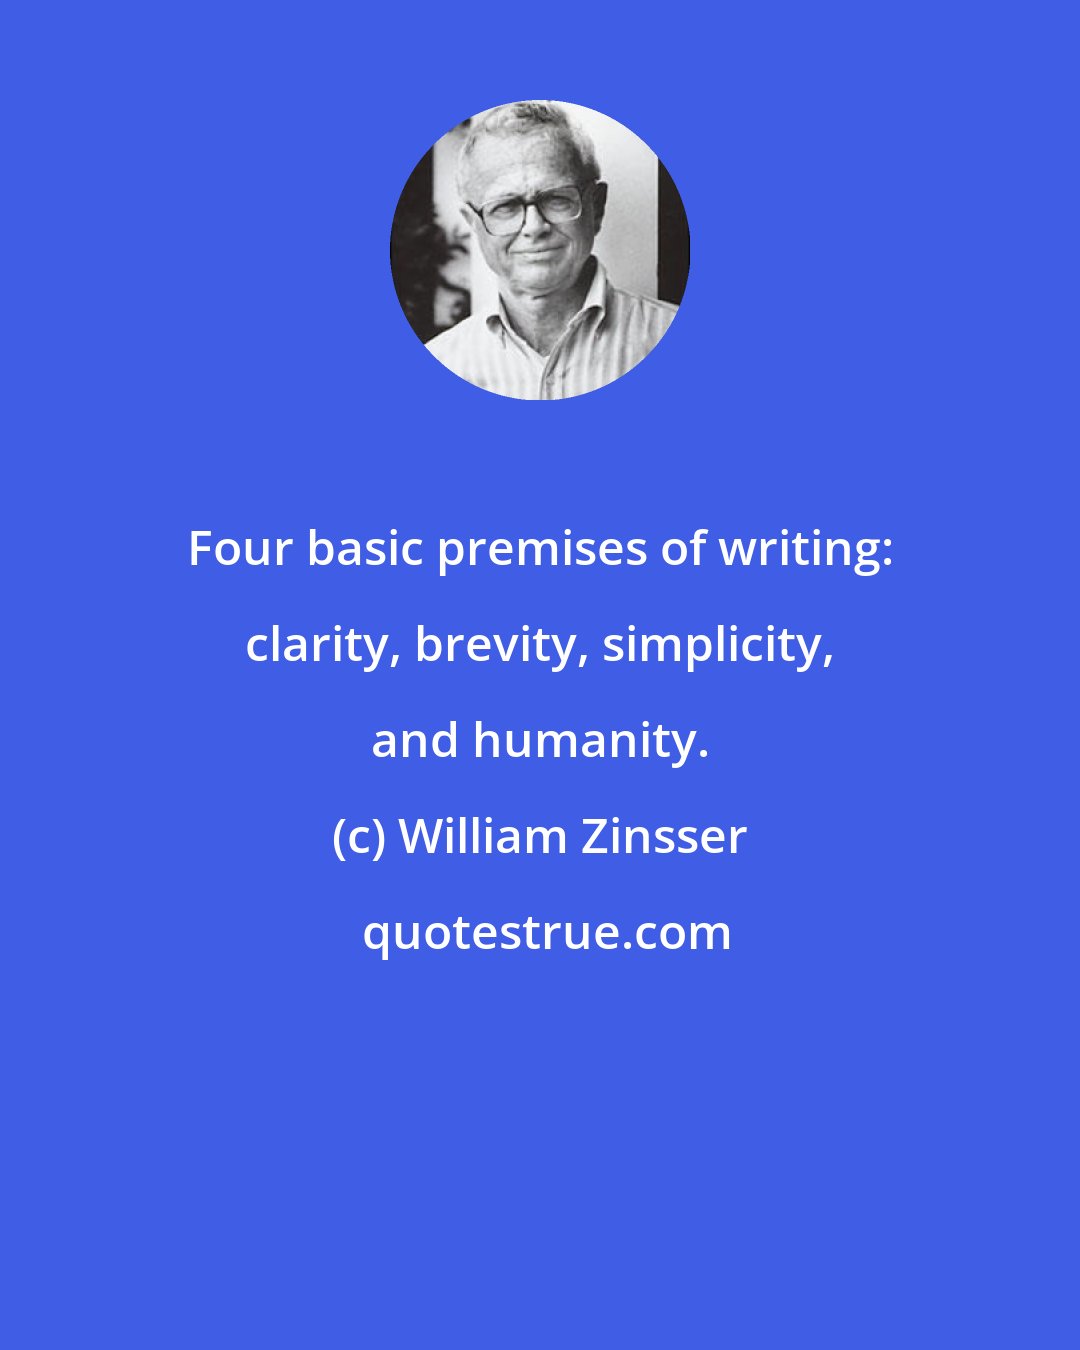 William Zinsser: Four basic premises of writing: clarity, brevity, simplicity, and humanity.